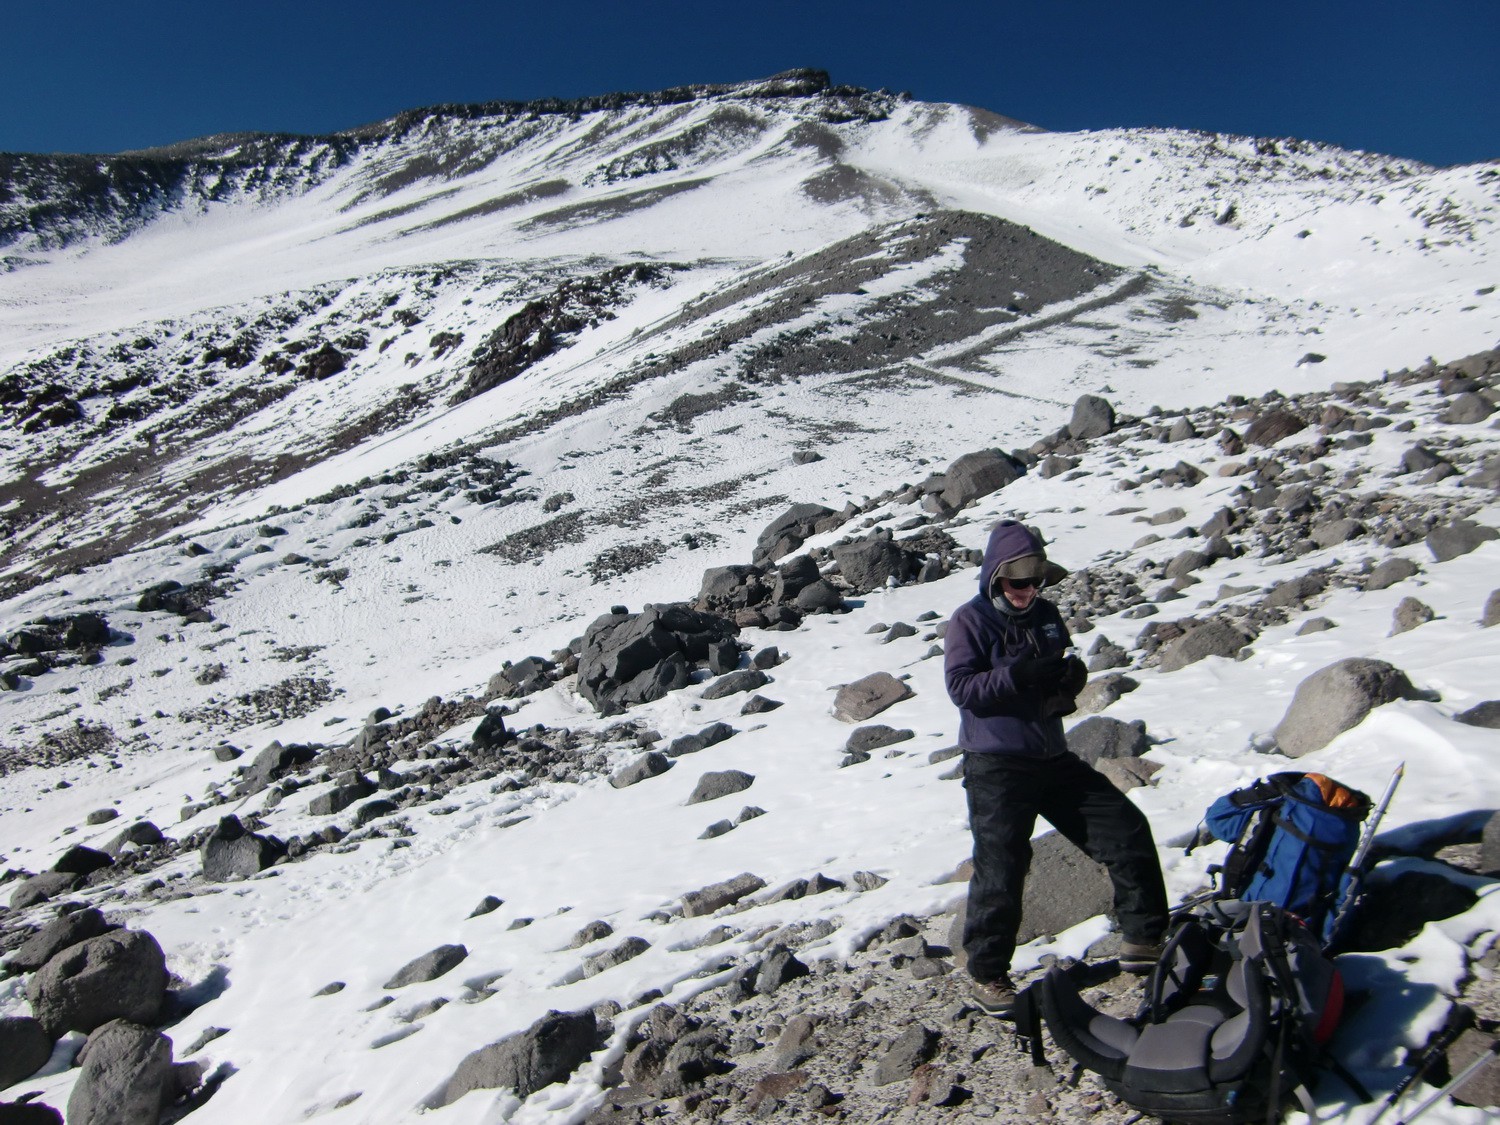 At 6000 meter height - In the background the path to the summit of Ojos del Salado